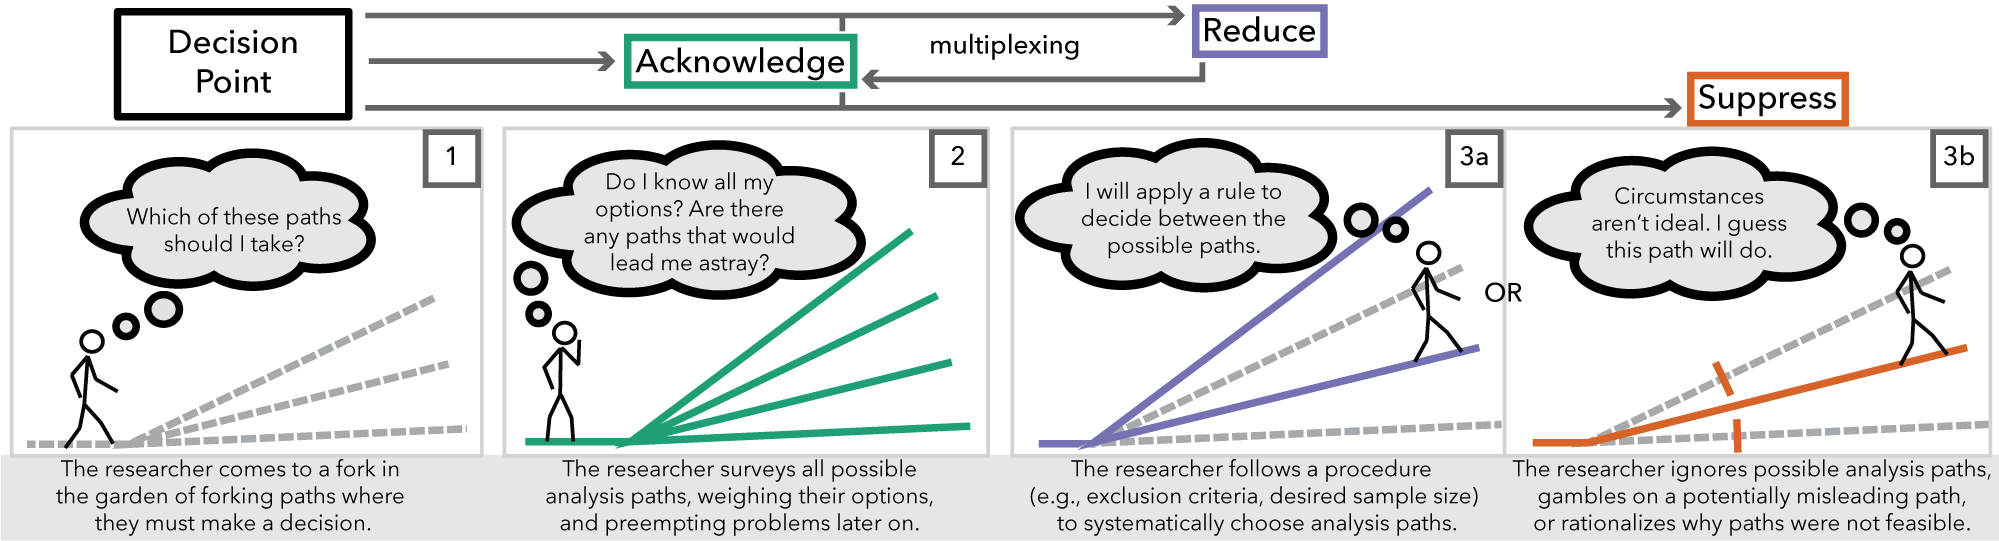 A representation of decision-making strategies used by researchers when navigating the garden of forking paths: a series of analytical decision-points, each of which might impact results. Researchers navigate these decision-points at their discretion such that uncertainty about their choices propagates through their analysis. The diagram at the top depicts observed temporal orderings of these strategies, e.g., multiplexing across choices in a loop of acknowledgement and reduction.